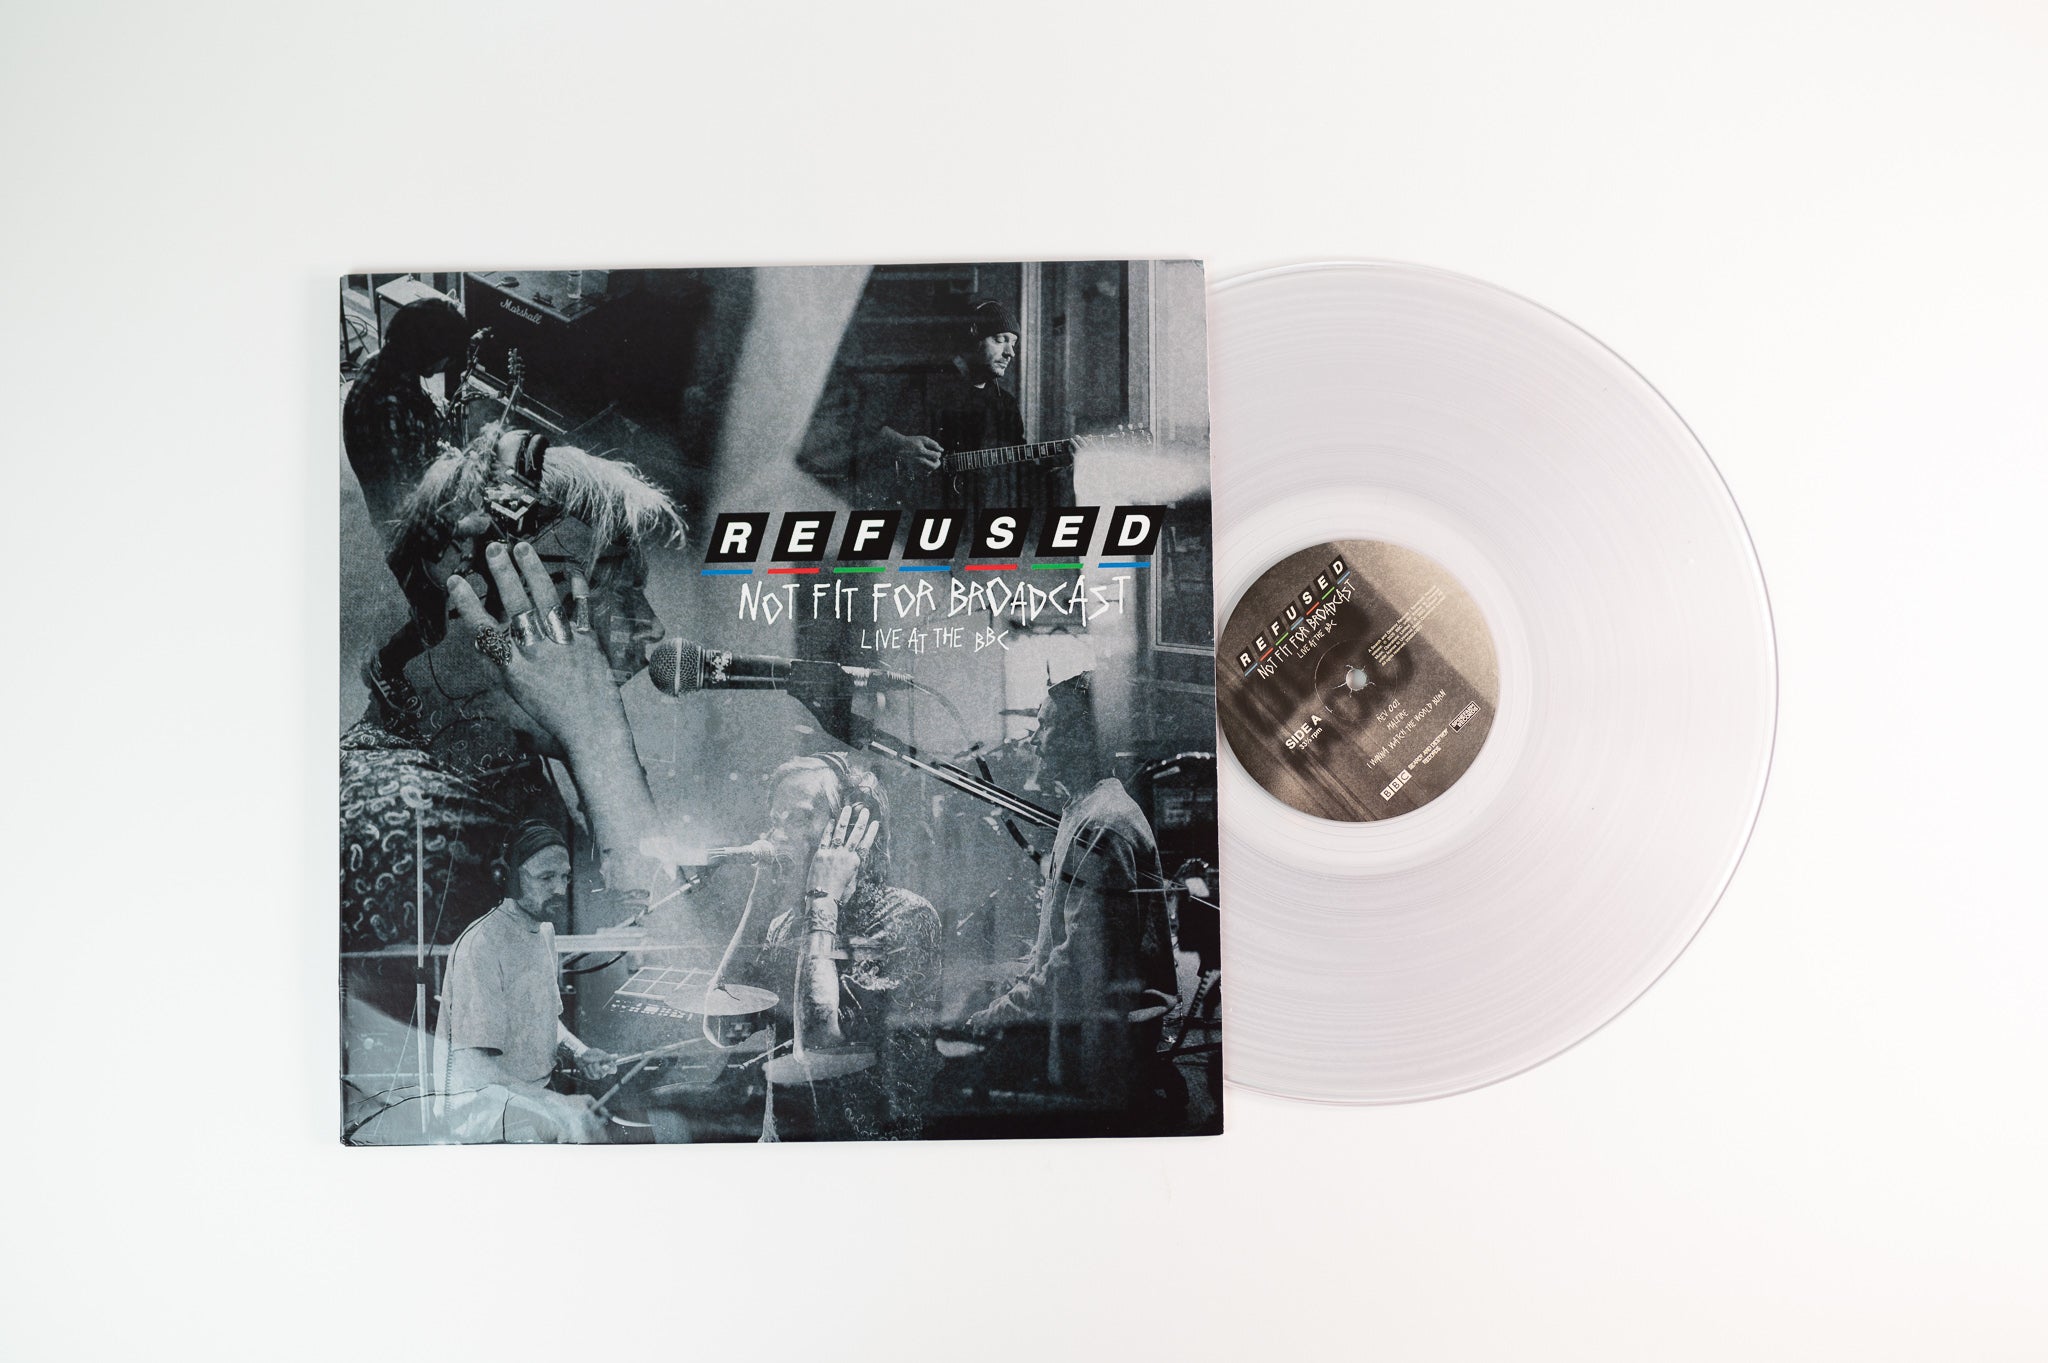 Refused - Not Fit For Broadcast (Live At The BBC) on Search & Destroy Ltd RSD 2020 Clear Vinyl